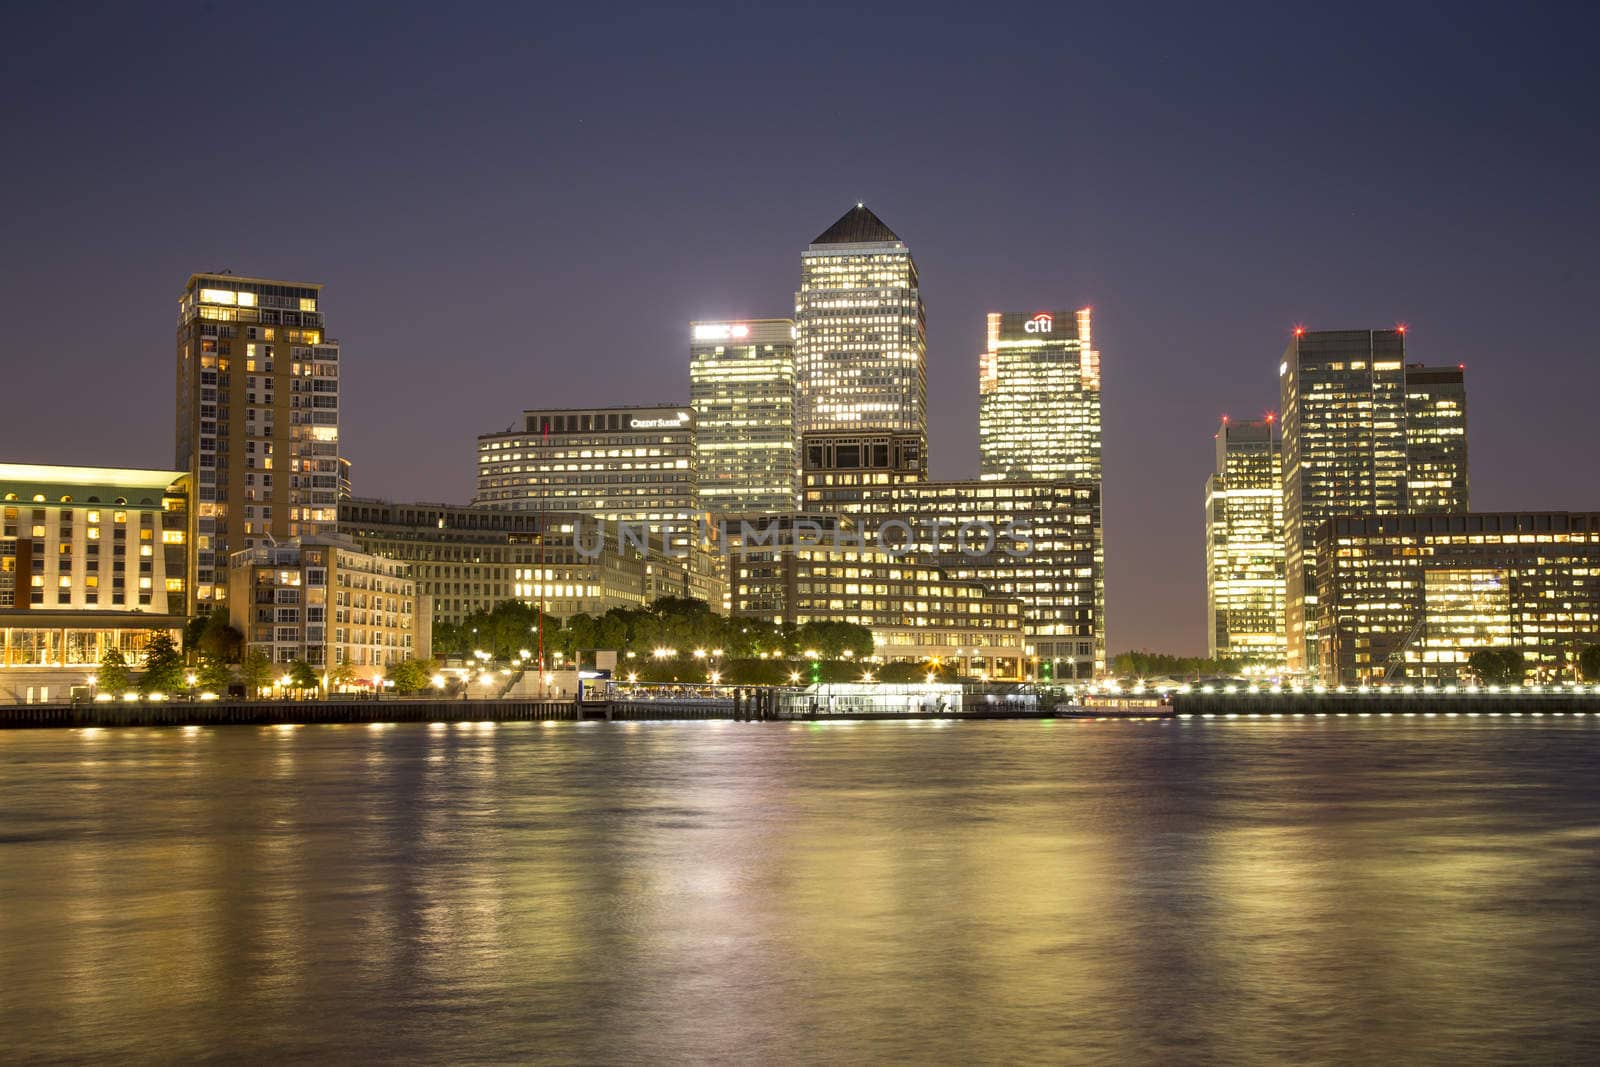 London, UK - August 7, 2015: Canary Wharf business and financial district at night